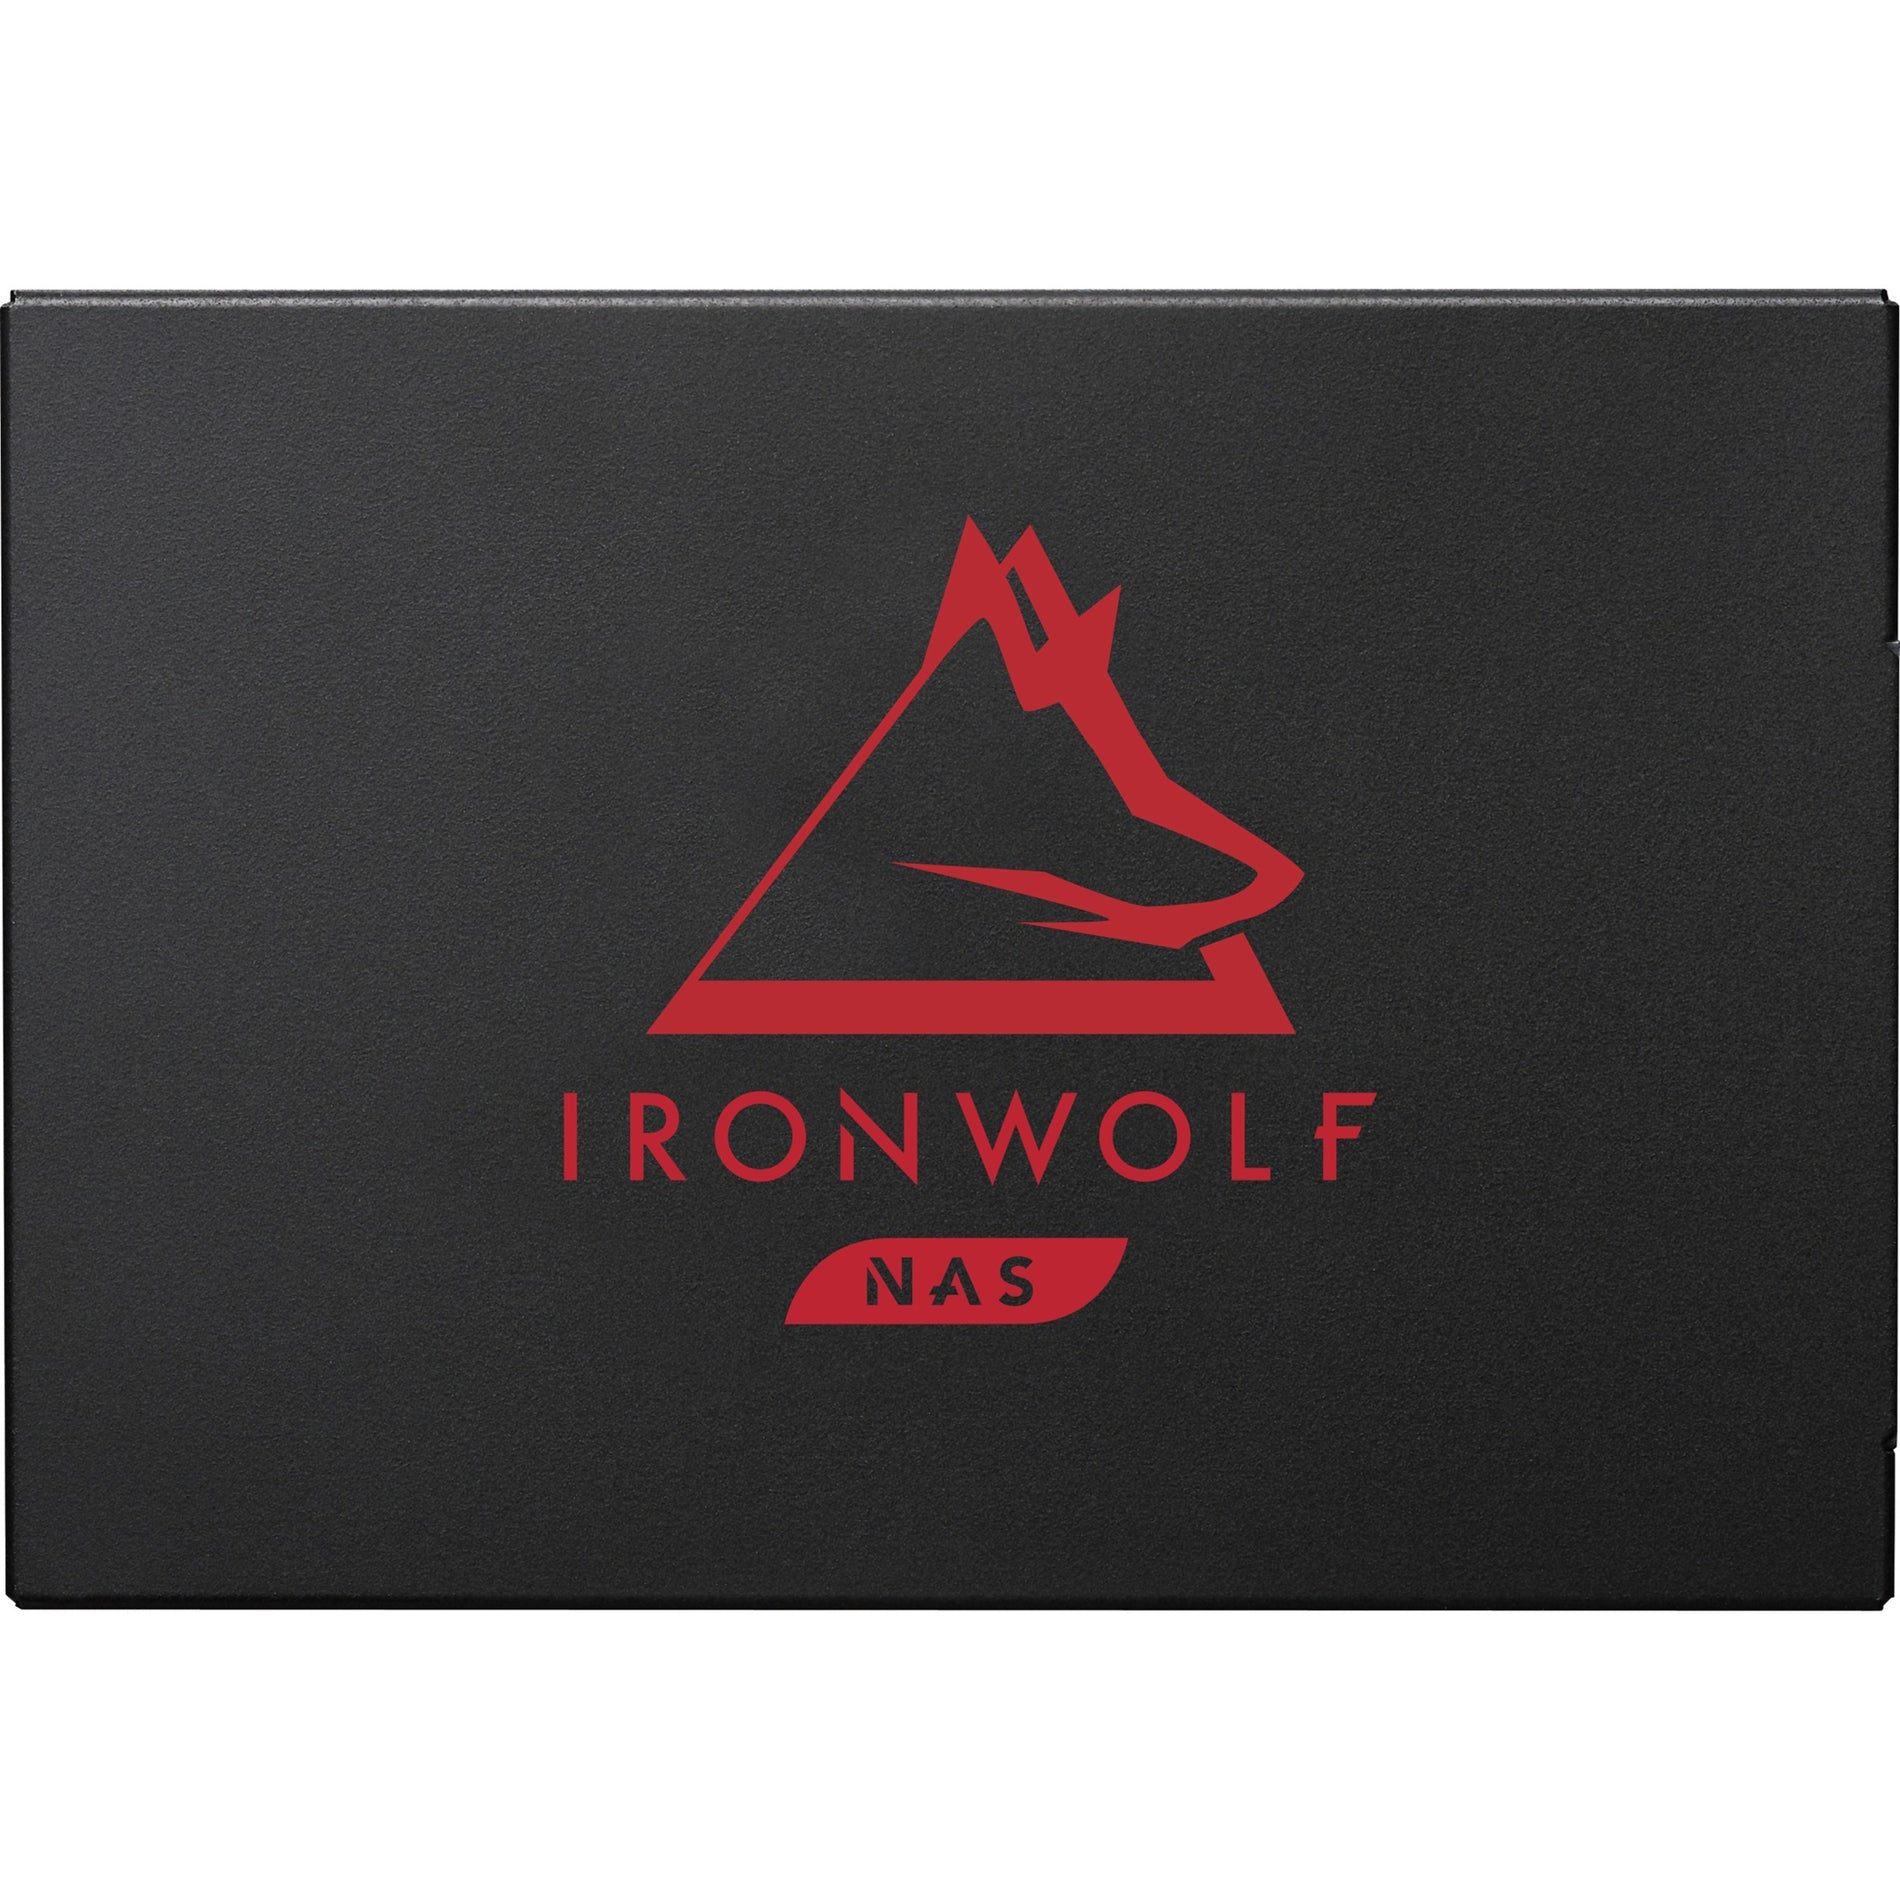 Seagate ZA250NM1A002 IronWolf 125 SSD 250GB Retail 2.5in SATA 6Gb/s 7mm 3D TLC, High-Performance Solid State Drive for Reliable Storage